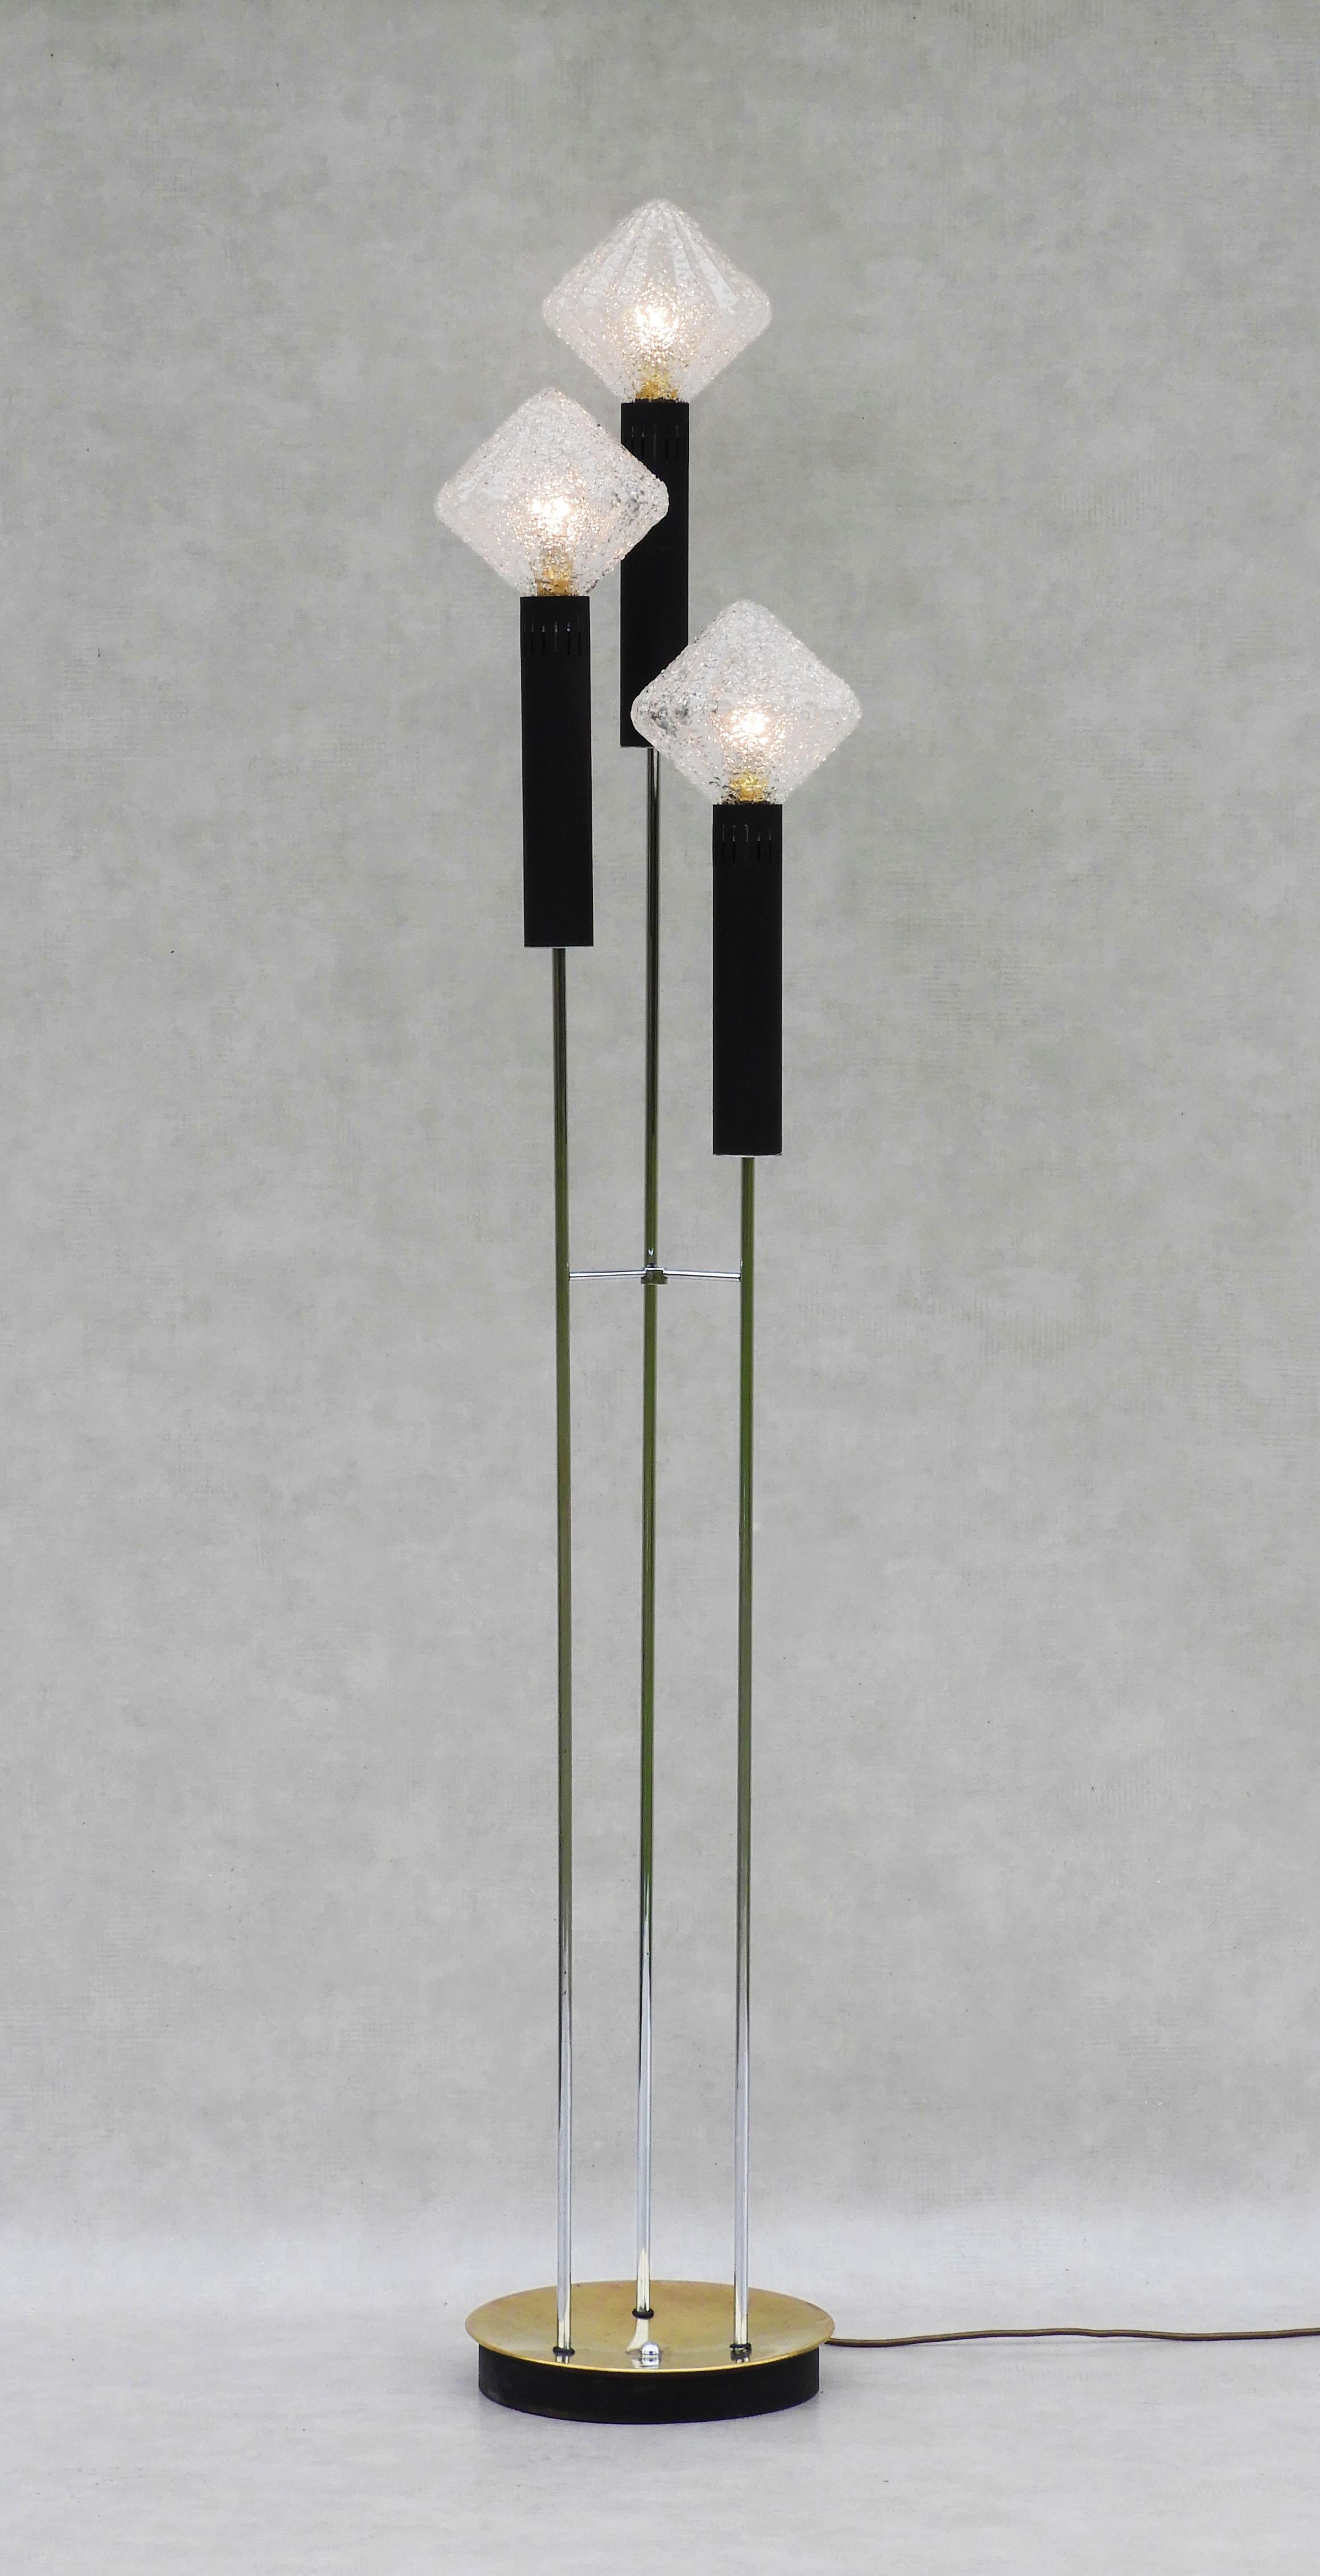 Vintage French floor lamp three light torchère c1970

Mid-century three-light torchère floor lamp from 1970s France.
An unusual trio of pleated granulated glass ‘buds’ on matt black and chrome ‘stems’ supported by a circular brass plate and heavy